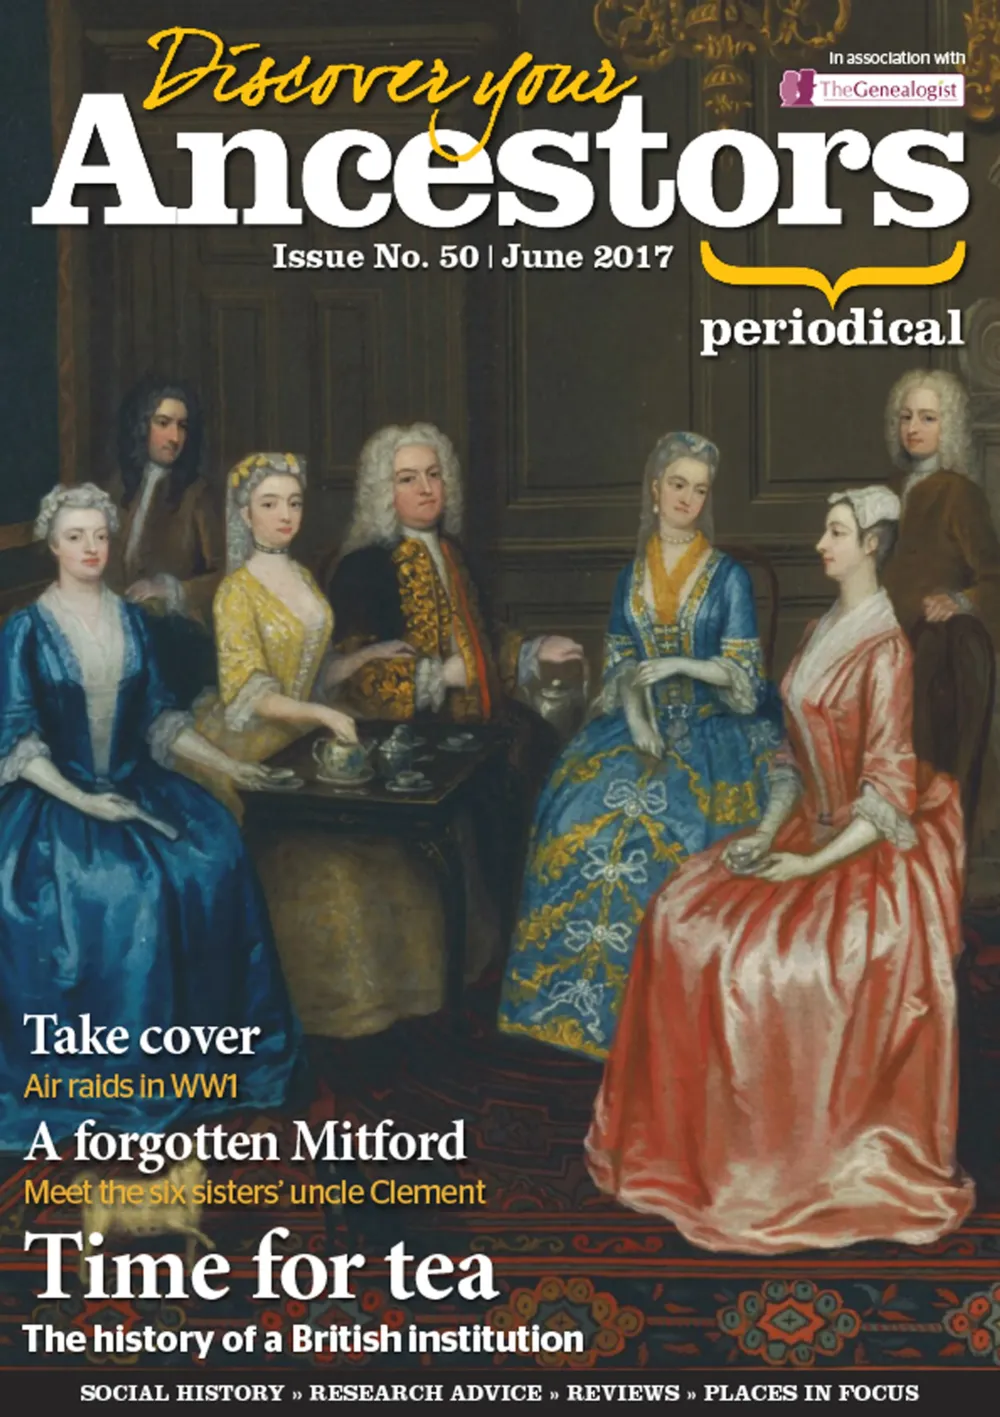 Discover Your Ancestors Periodical - June 2017